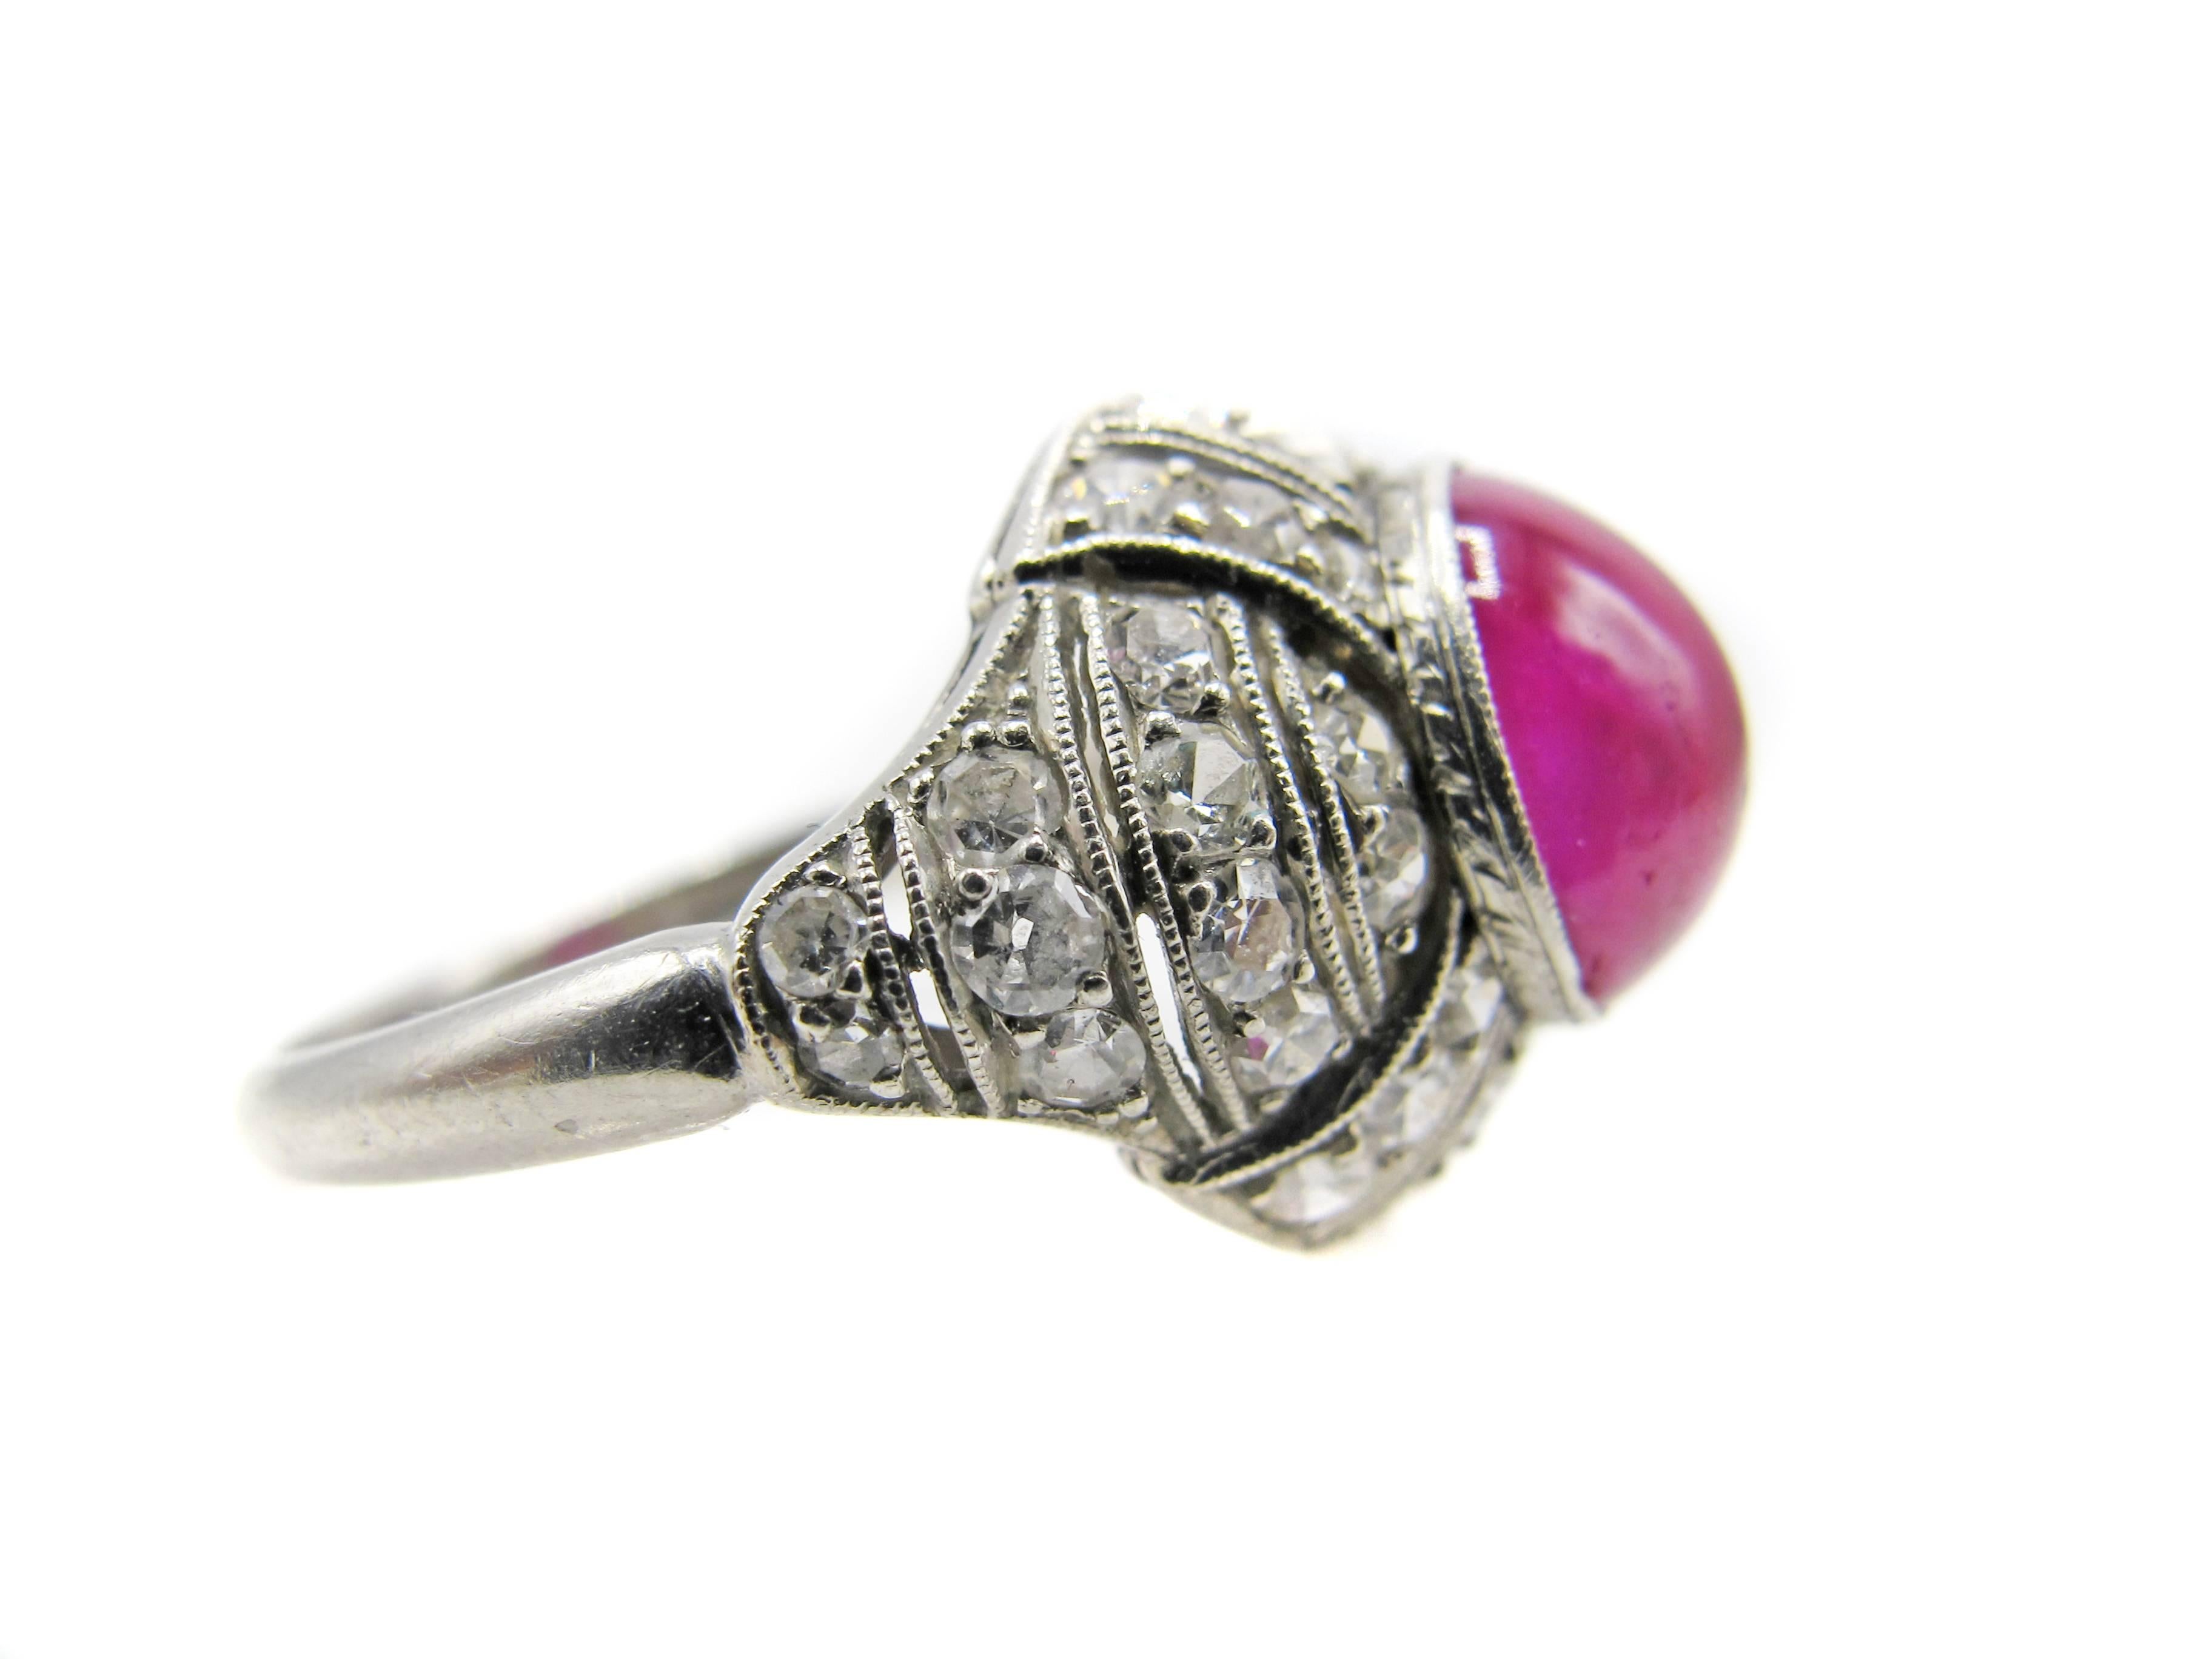 Enchanting French Art-Deco platinum diamond cabochon ruby ring from ca. 1930. The amazing craftsmanship and design of this ring is a true testament to the period it was created. The centrally bezel set Burma cabochon ruby is incredibly clear with